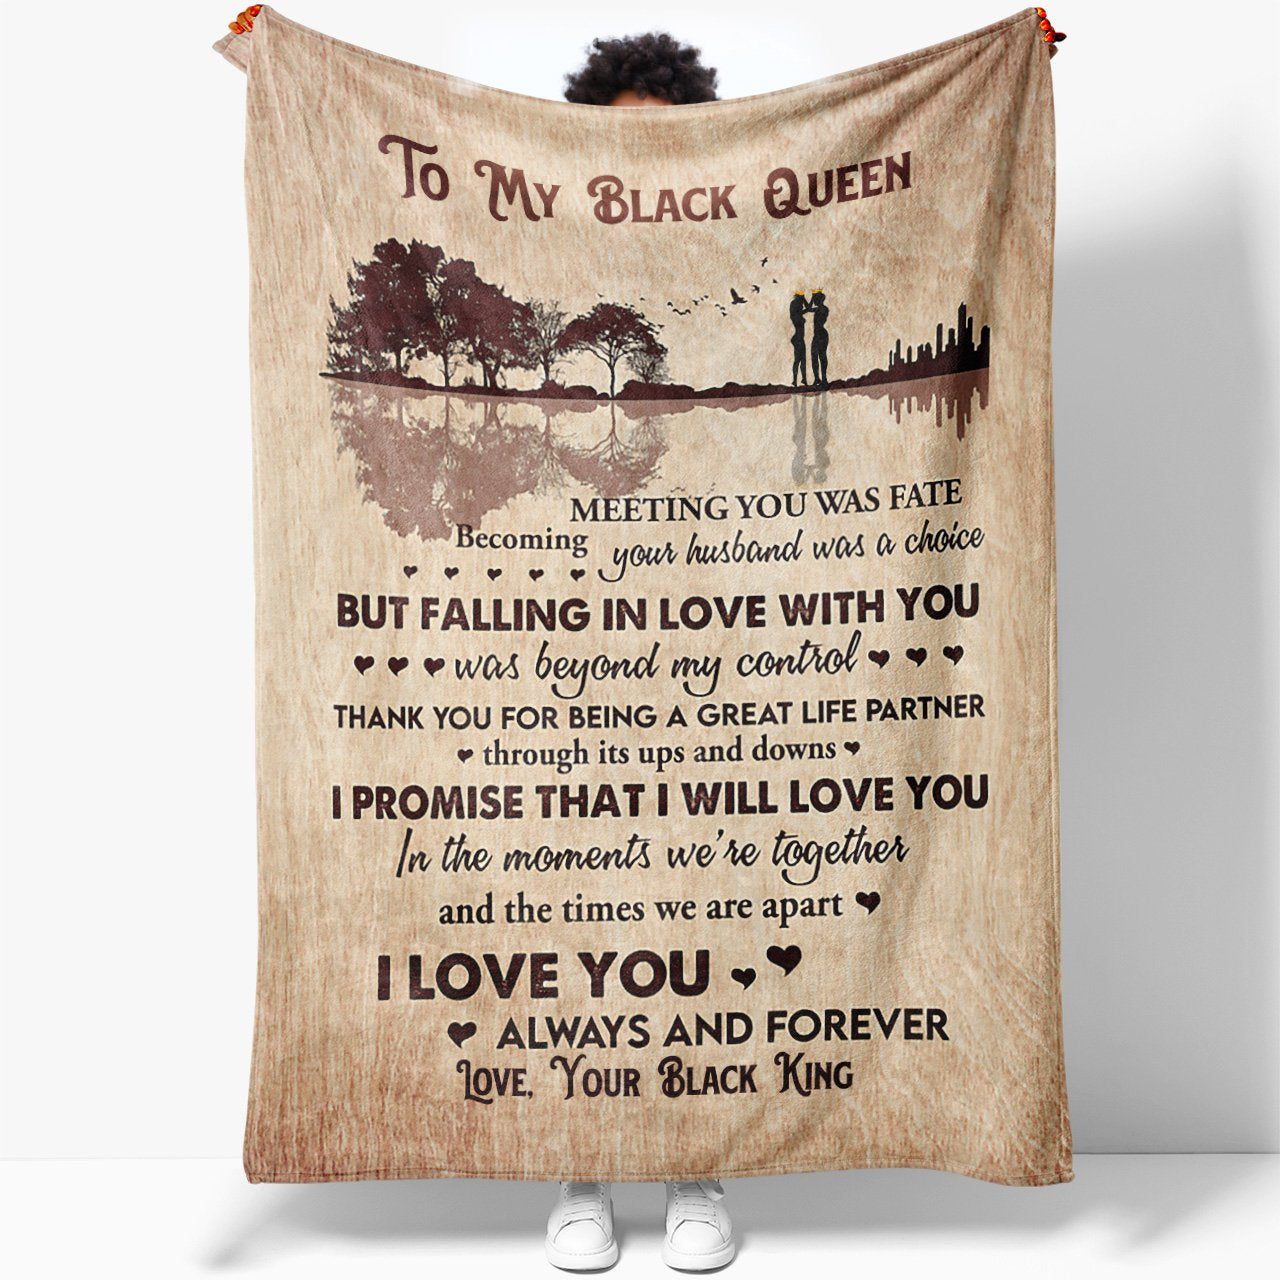 Blanket Gift Ideas for Black Wife, My Black Queen Falling in Love With You Blanket, Birthday Gifts For Her, Unique Christmas Gifts For Her Wife